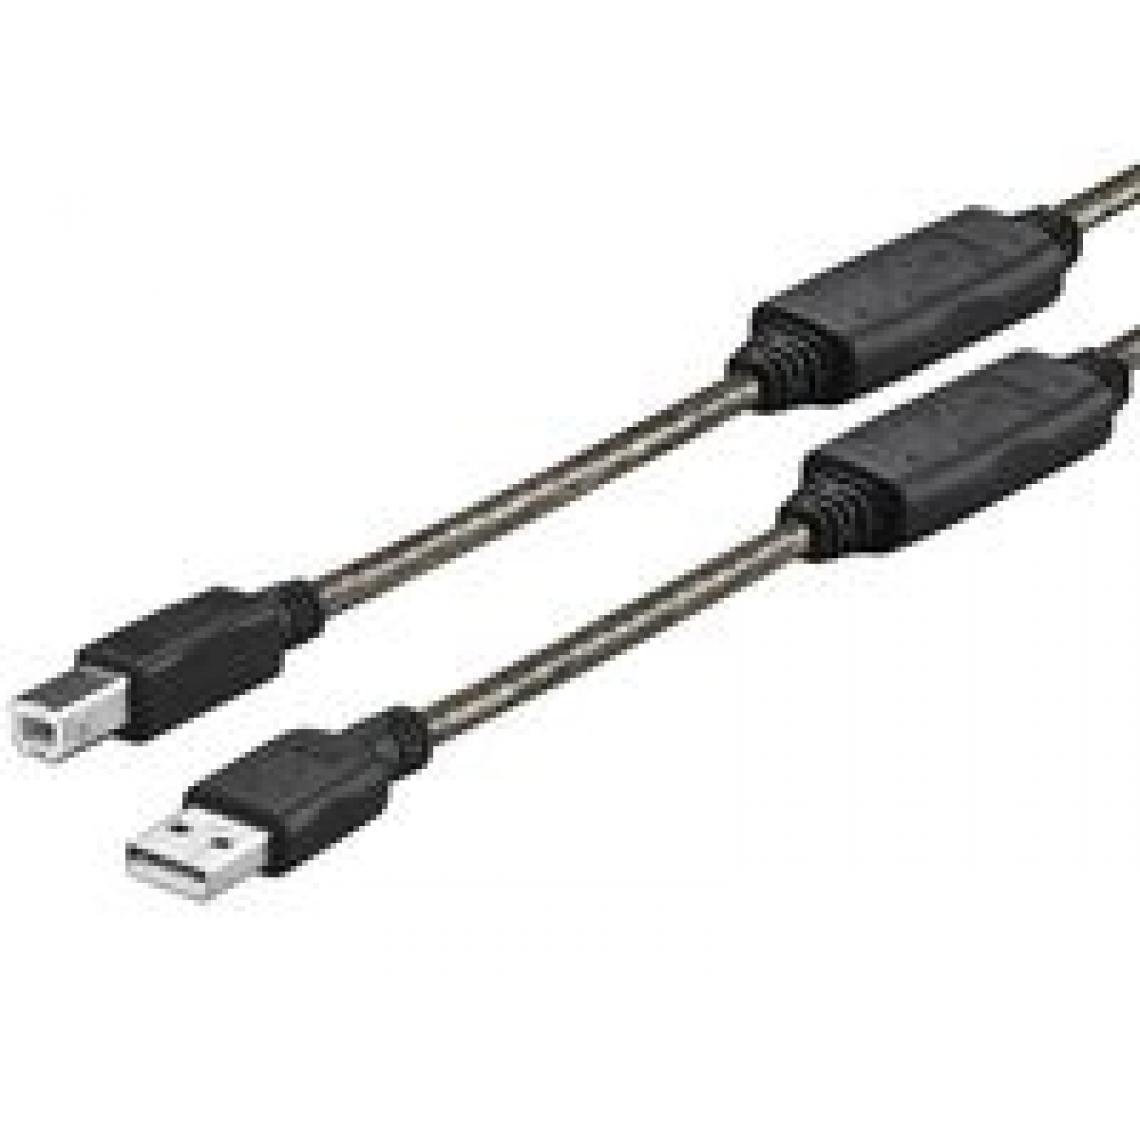 Inconnu - USB 2.0 Cable A - B M - M 20 M Built - in amplifer Double shieldings in cable - Câble antenne